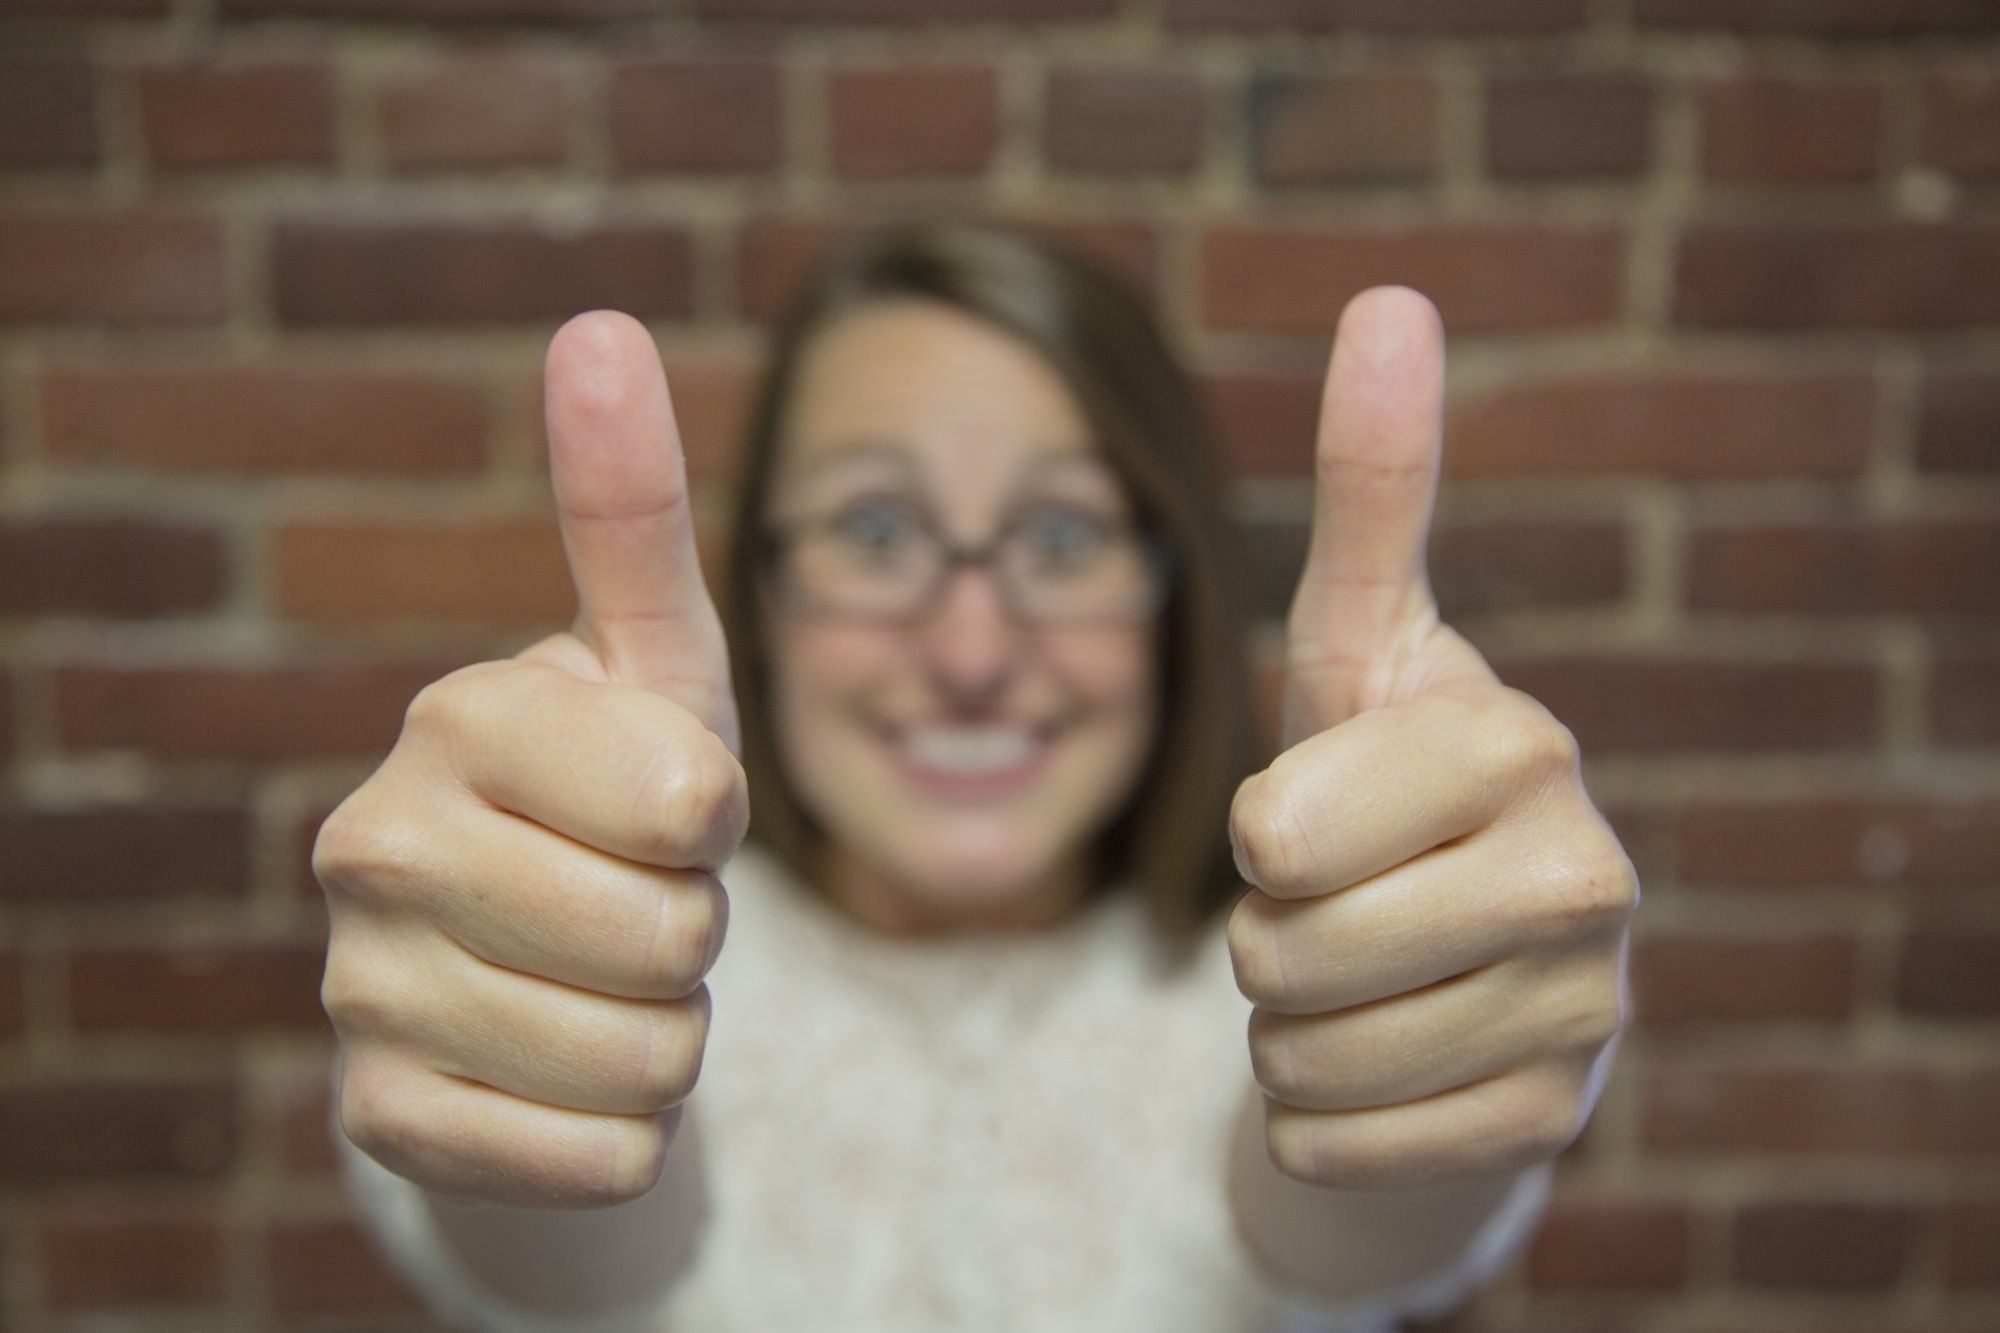 women in front of brick wall with two thumbs up smiling wearing glasses